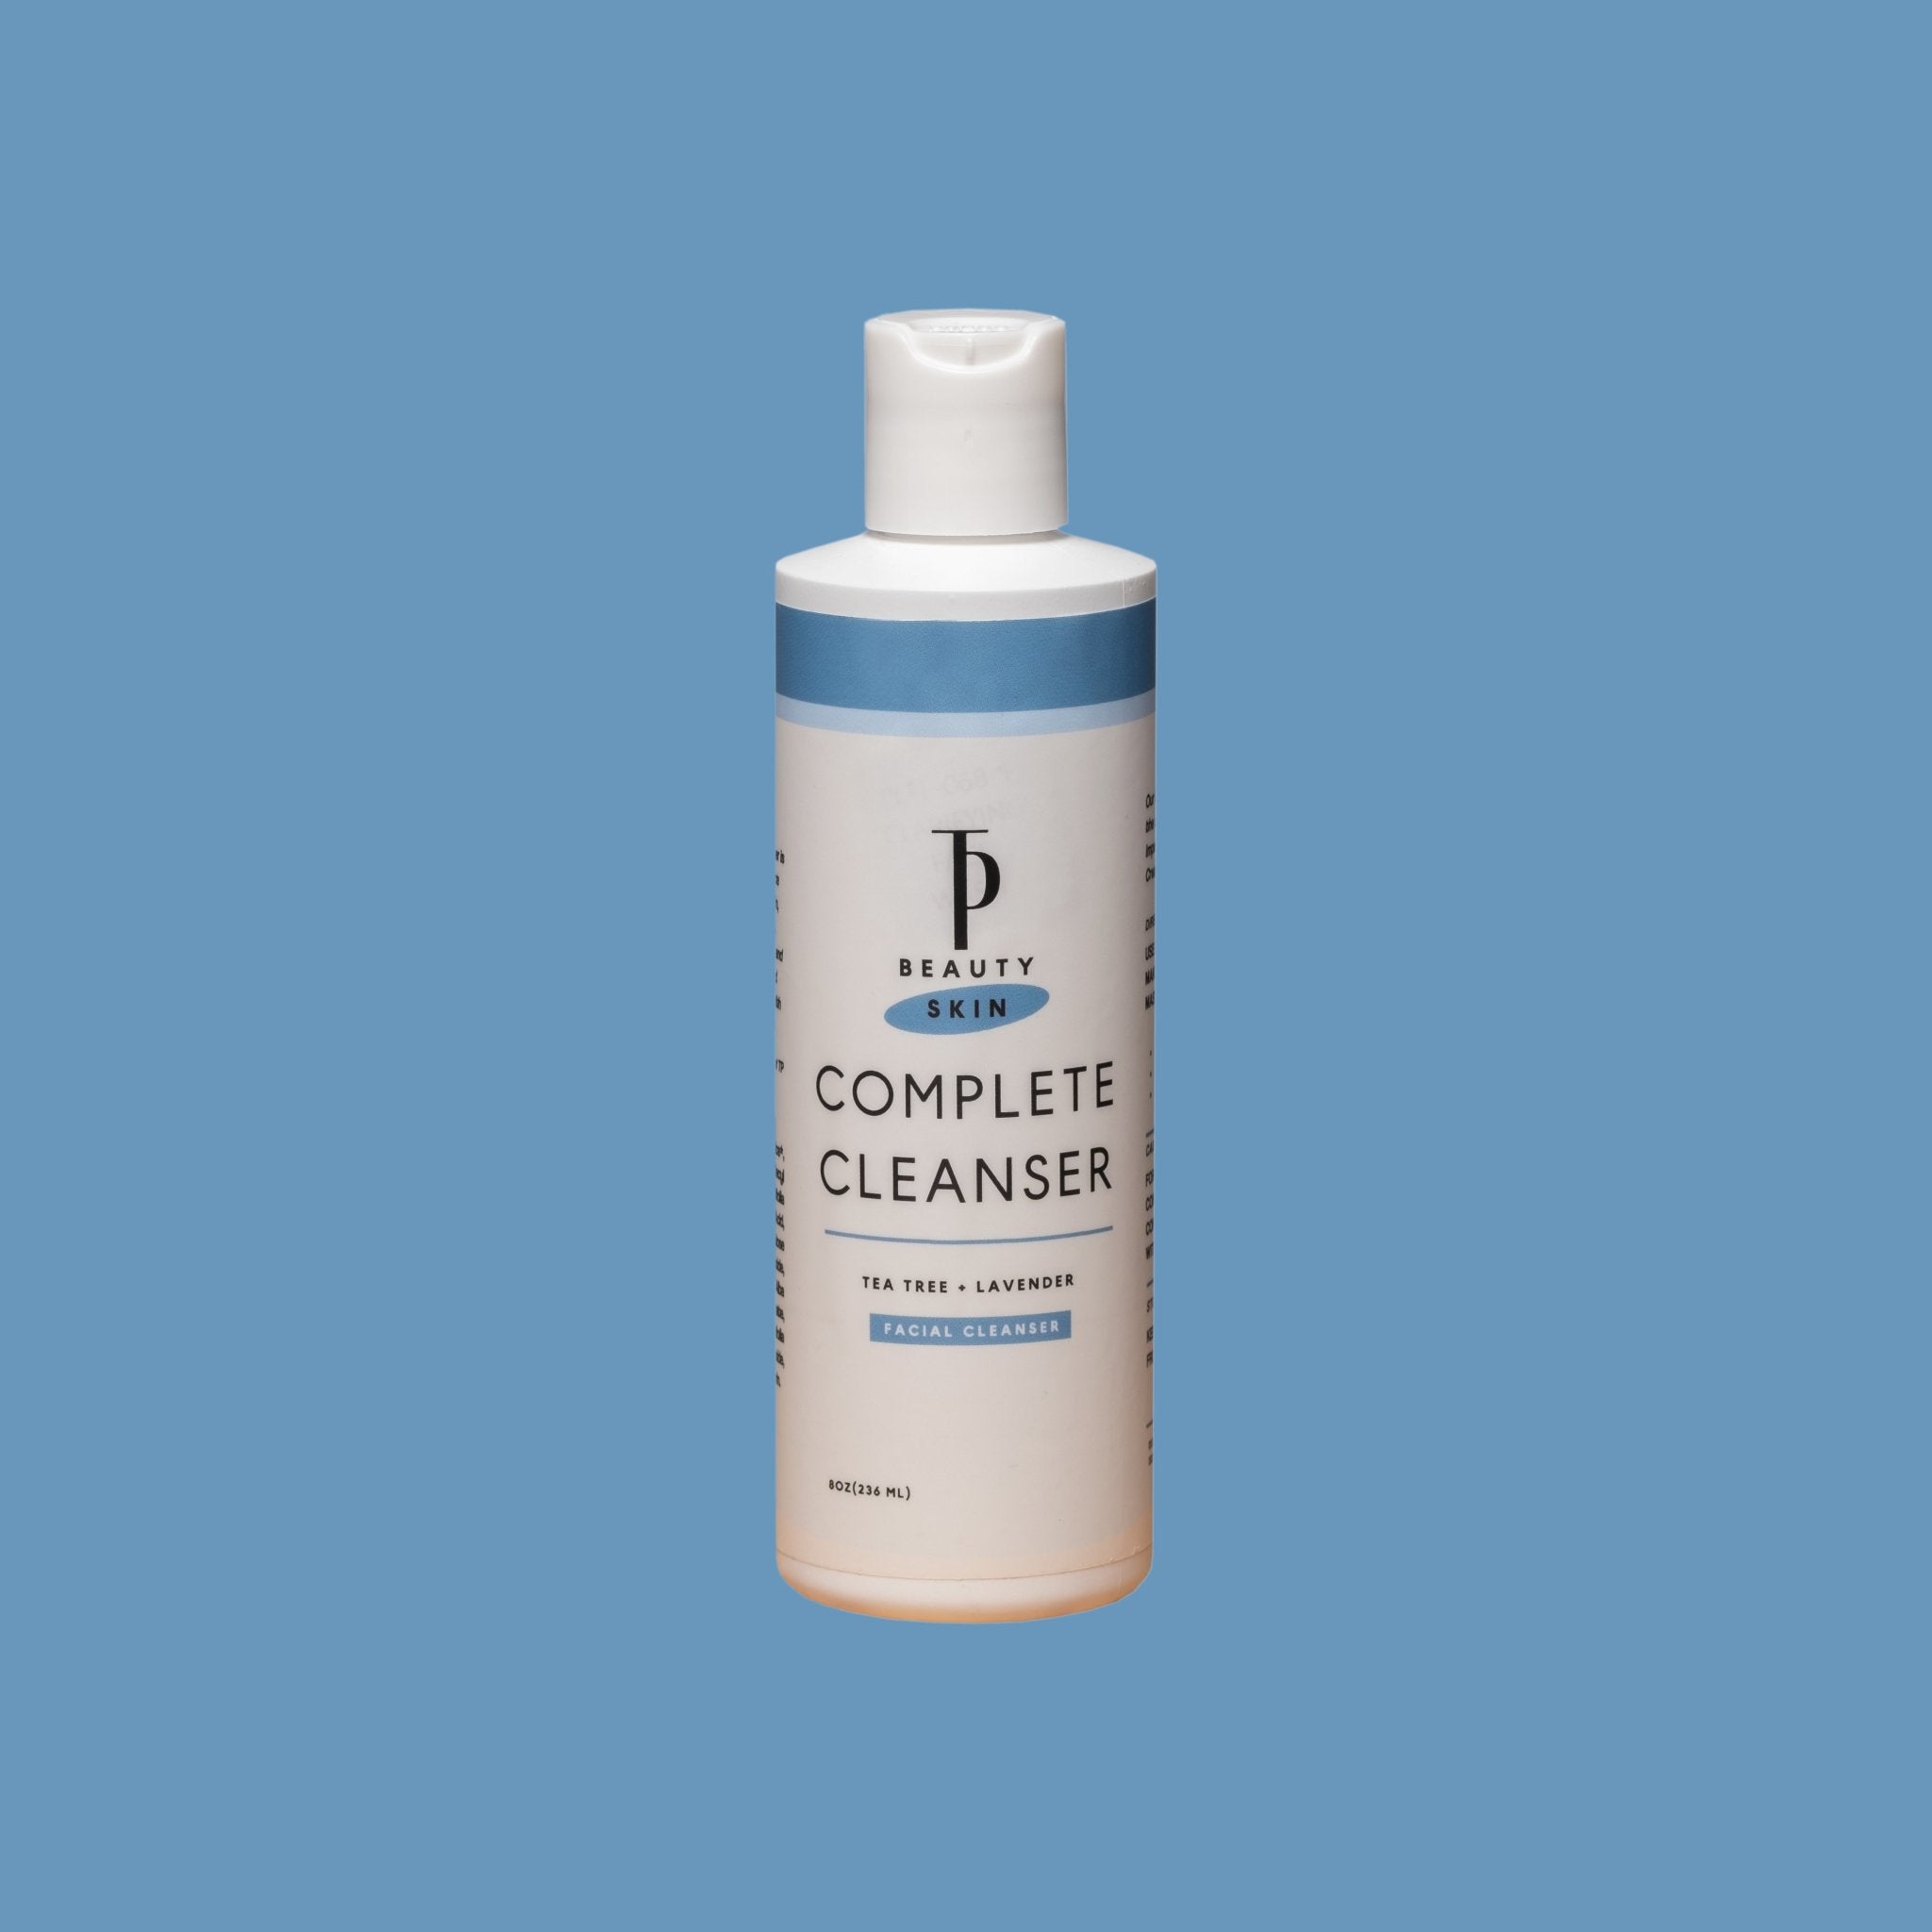 Complete Cleanser